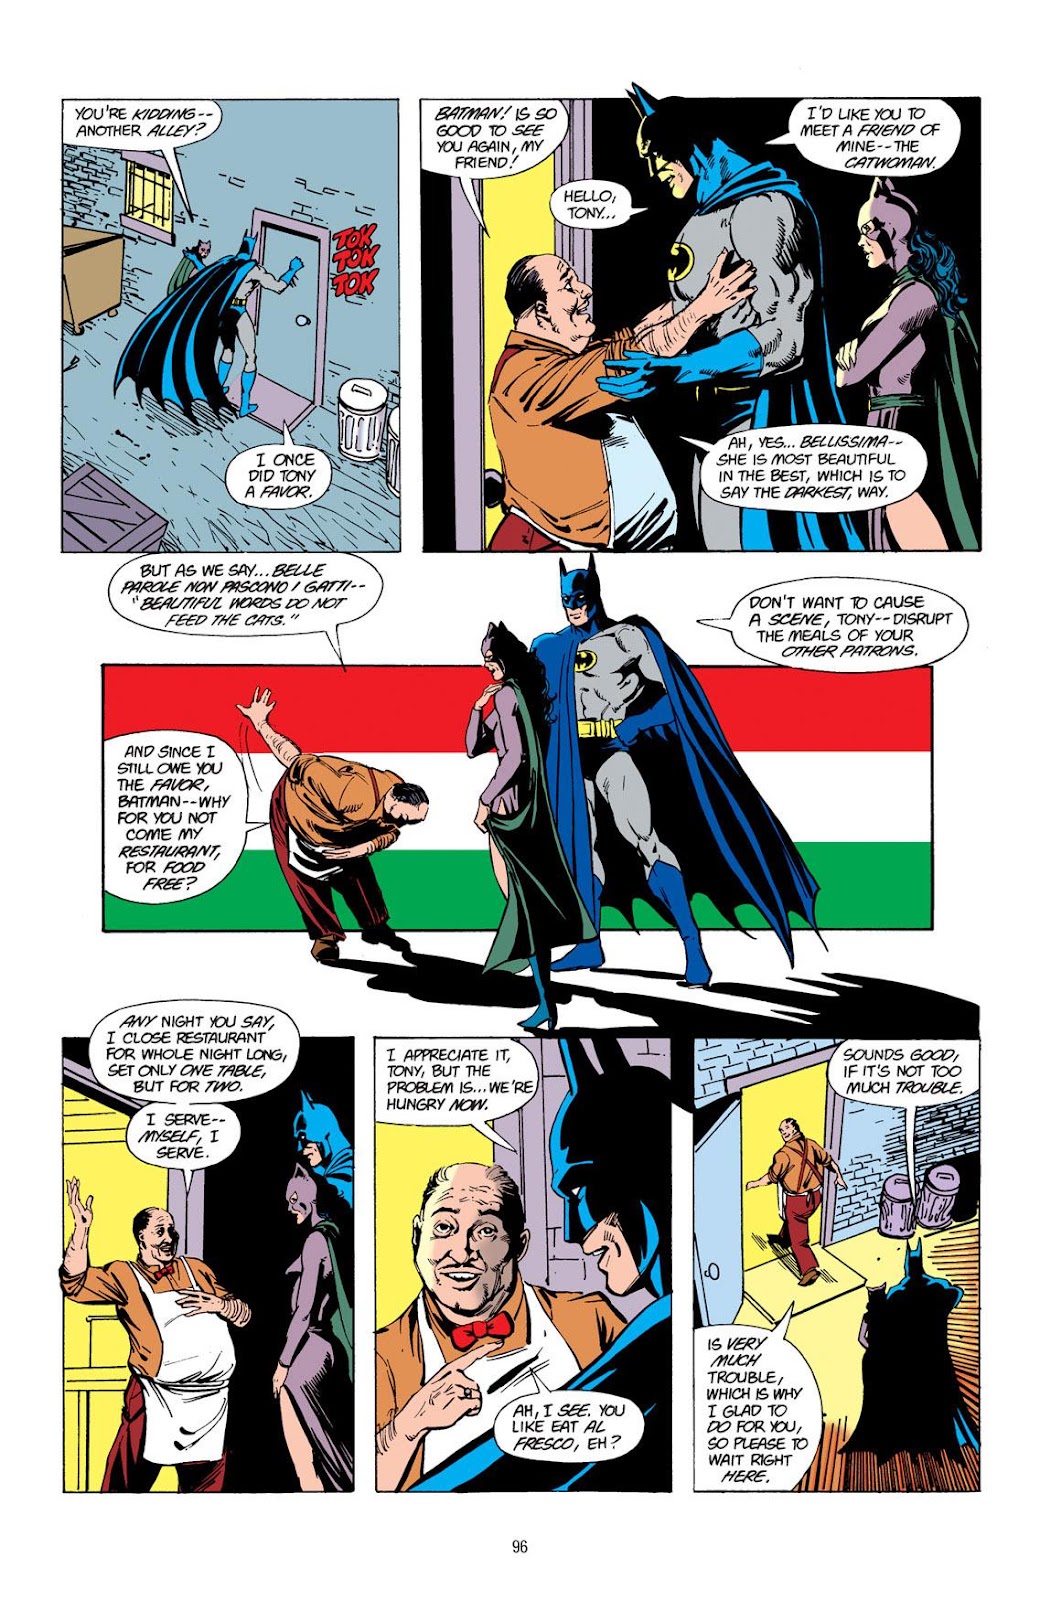 Read Batman: The Bat and the Cat: 80 Years of Romance Issue #TPB (Part 1)  Online Page 98